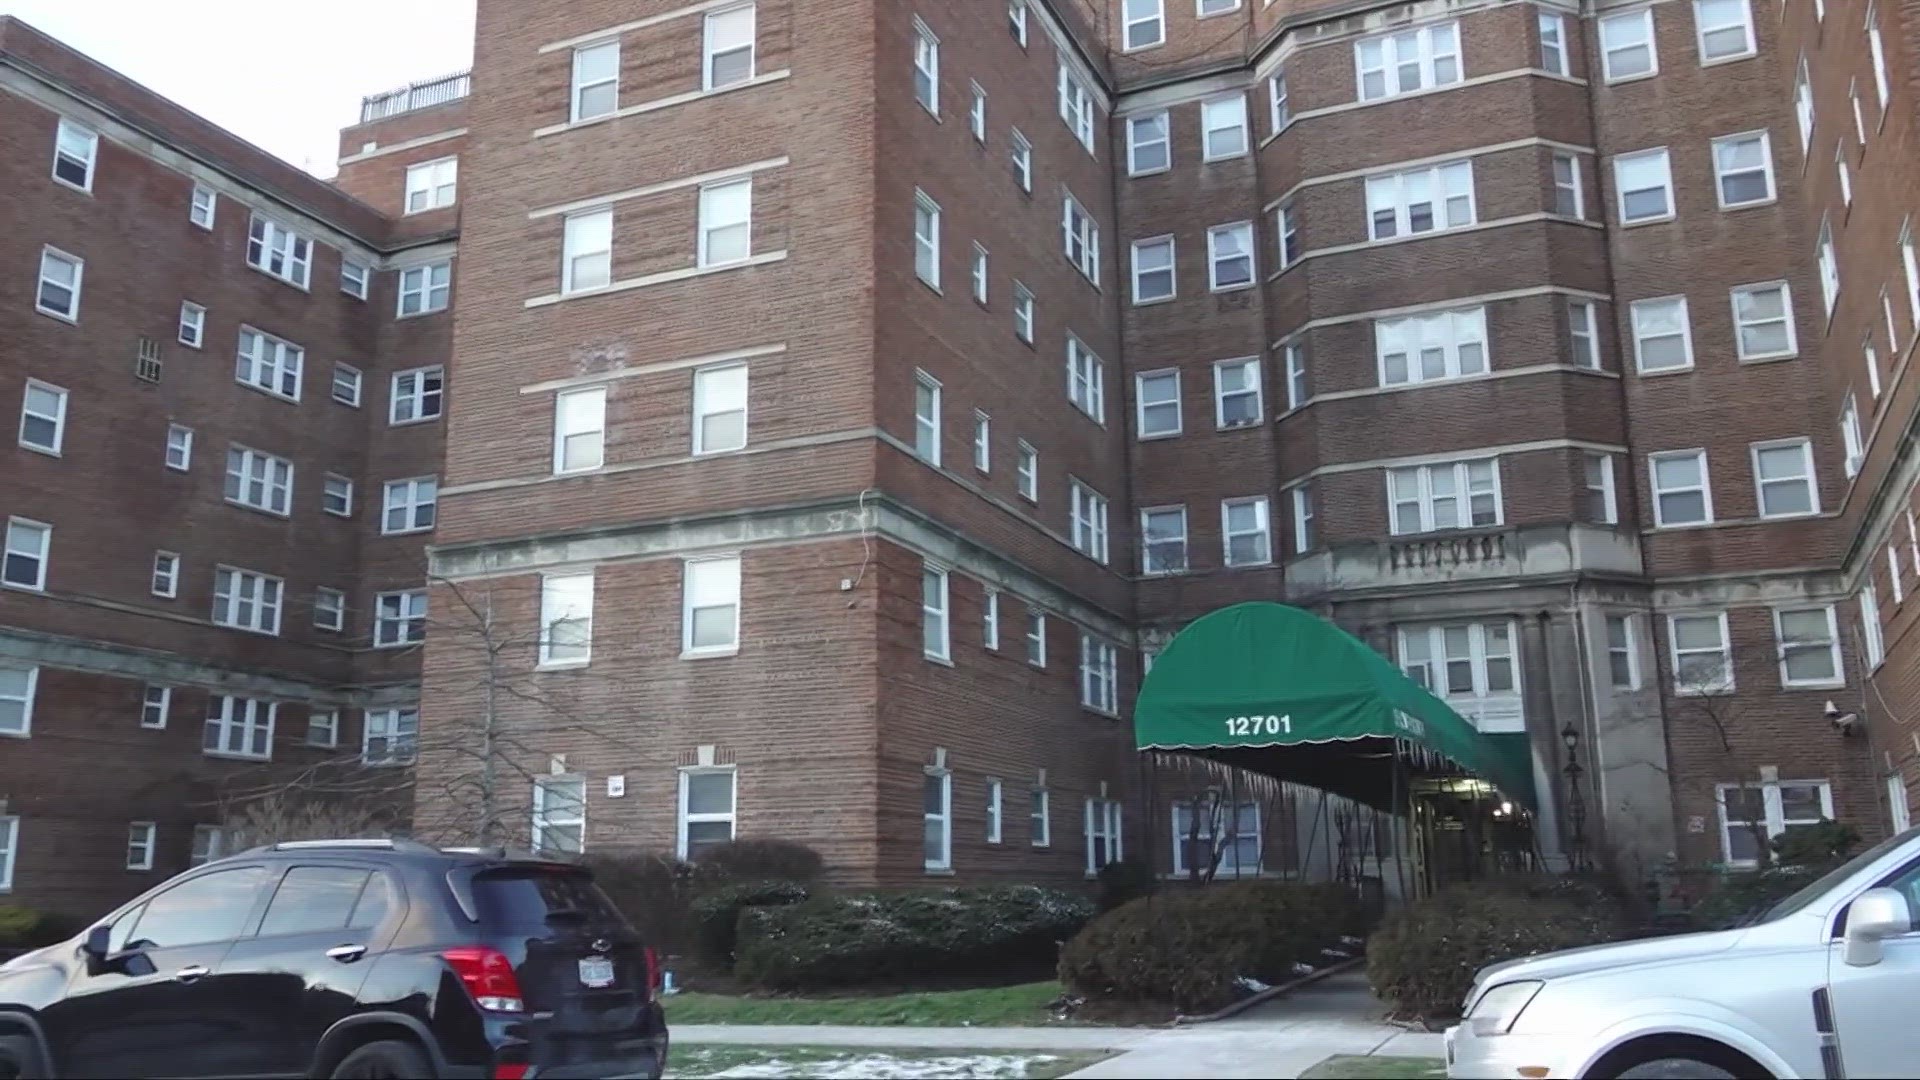 Tenants from the Residences at Shaker Square have  been demanding action for better living conditions.